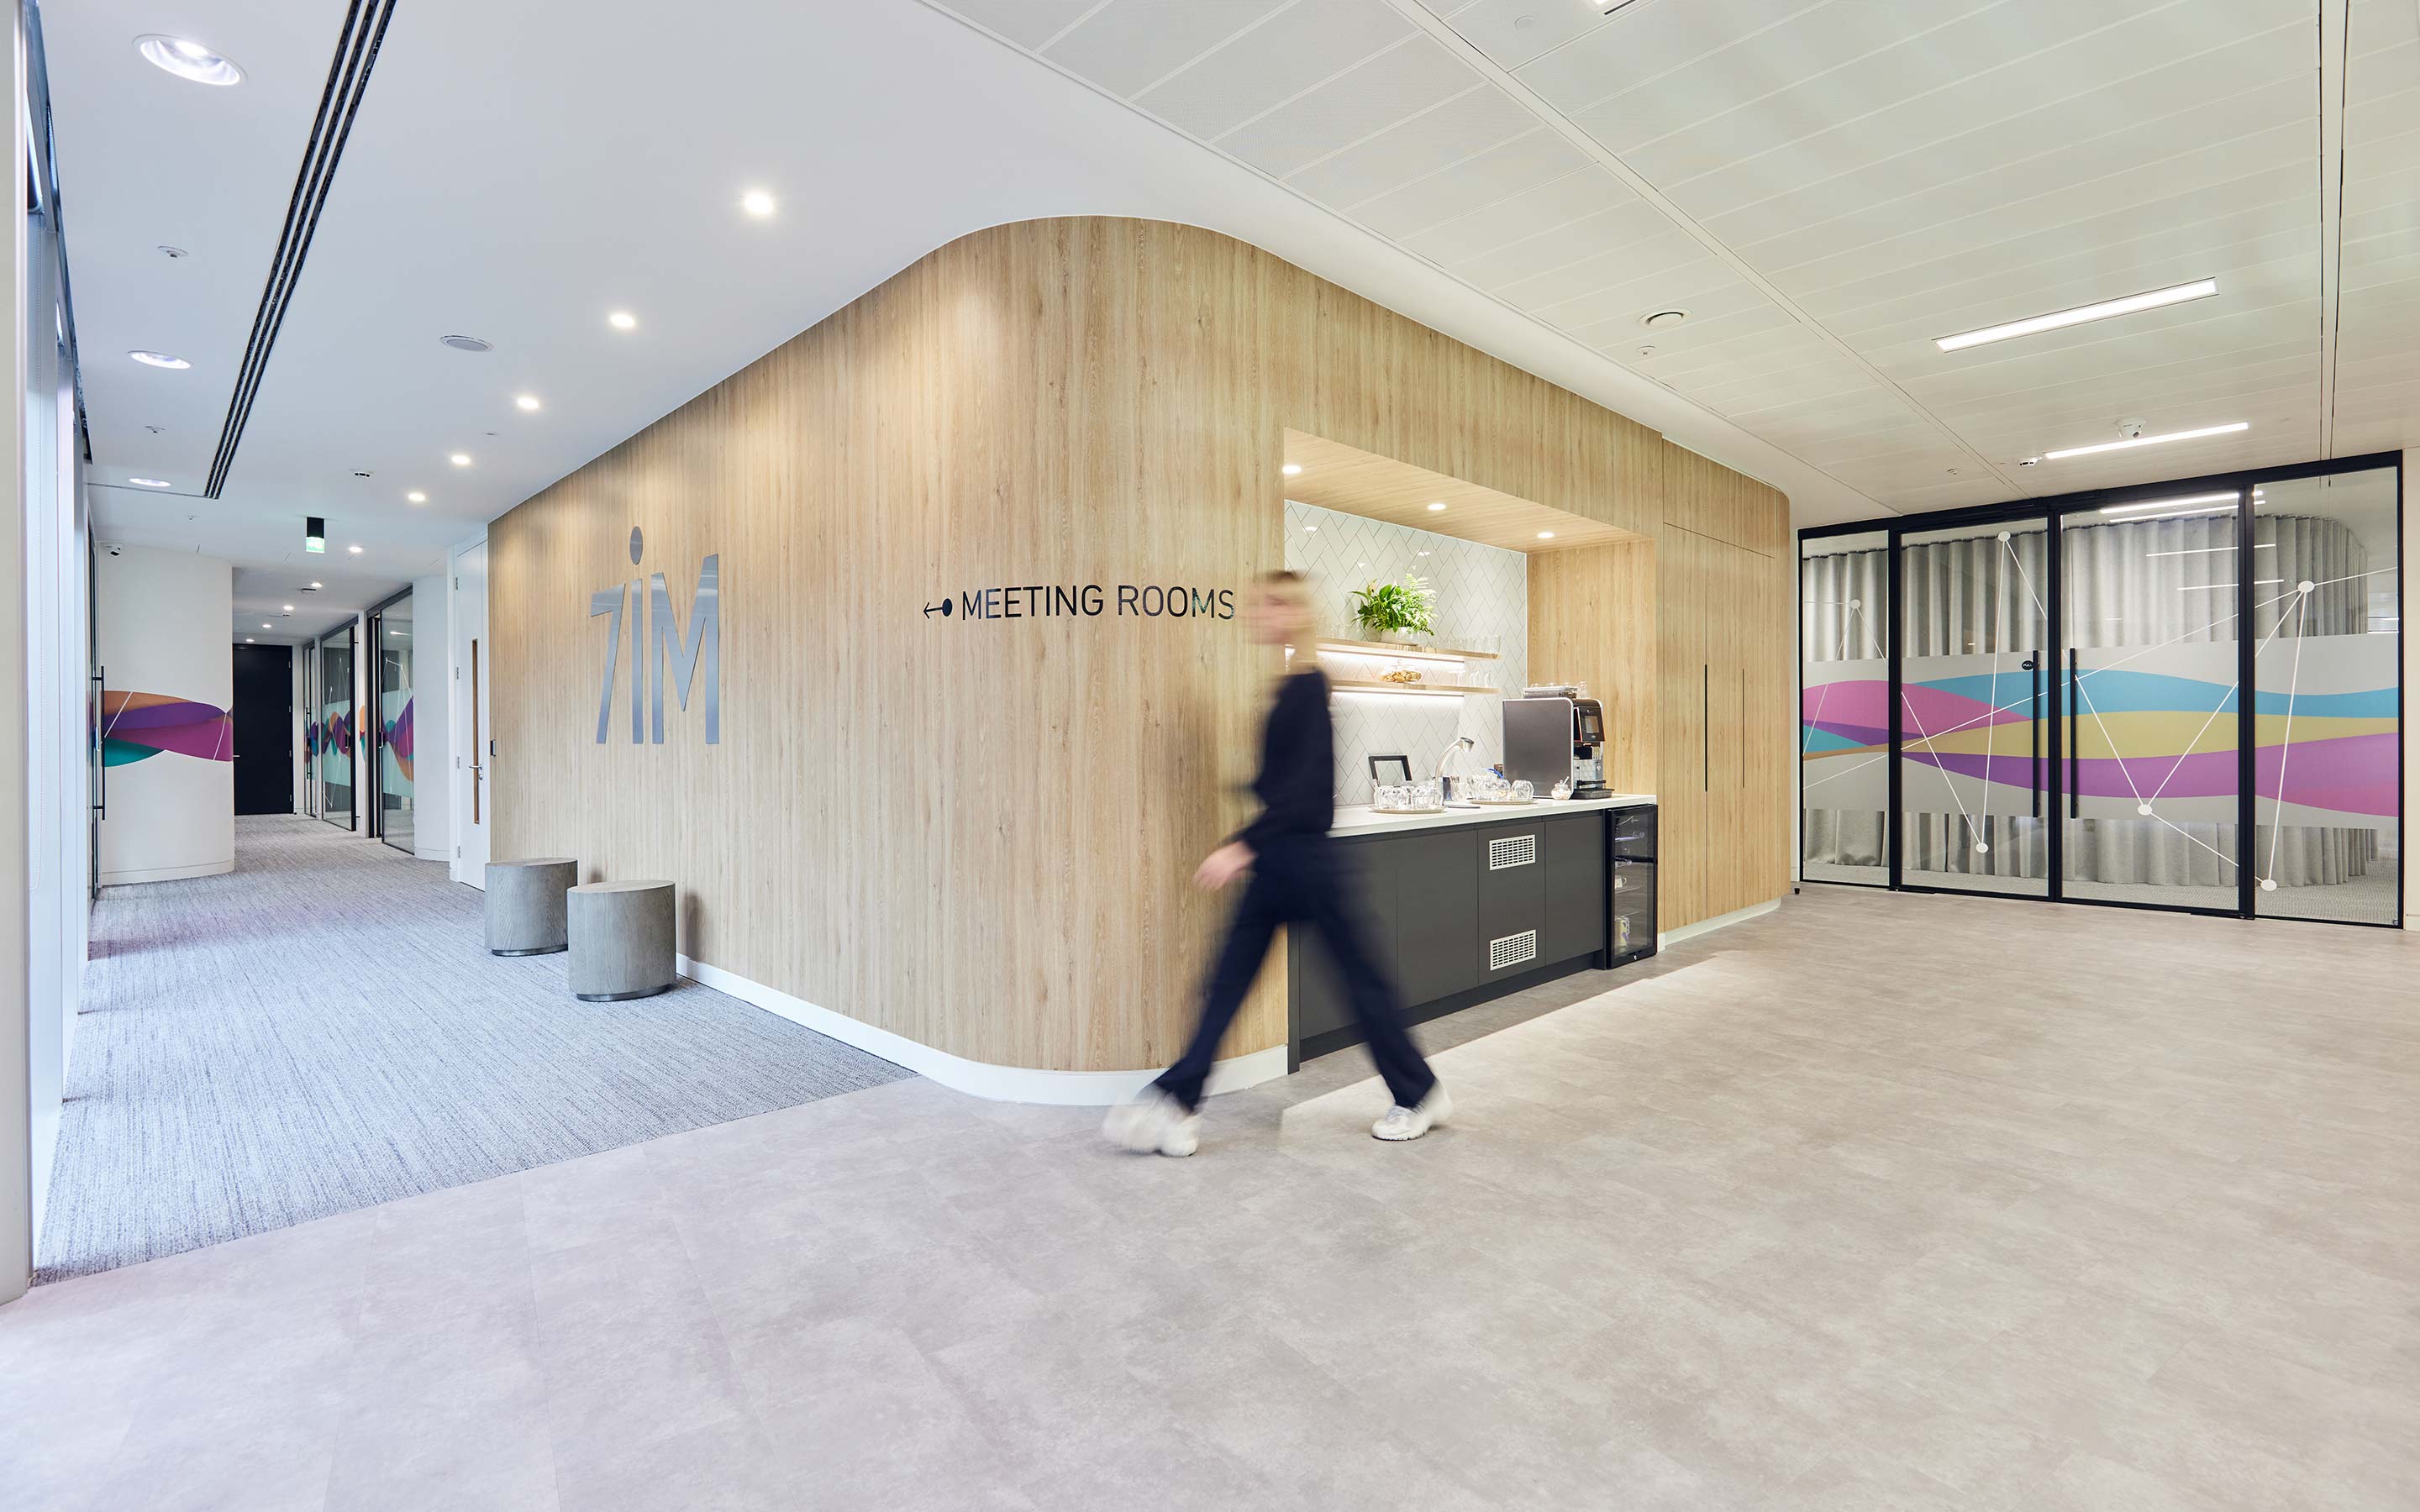 The image shows someone walking through a branded client reception area, complete with a teapoint, wooden wall panelling and soft seating